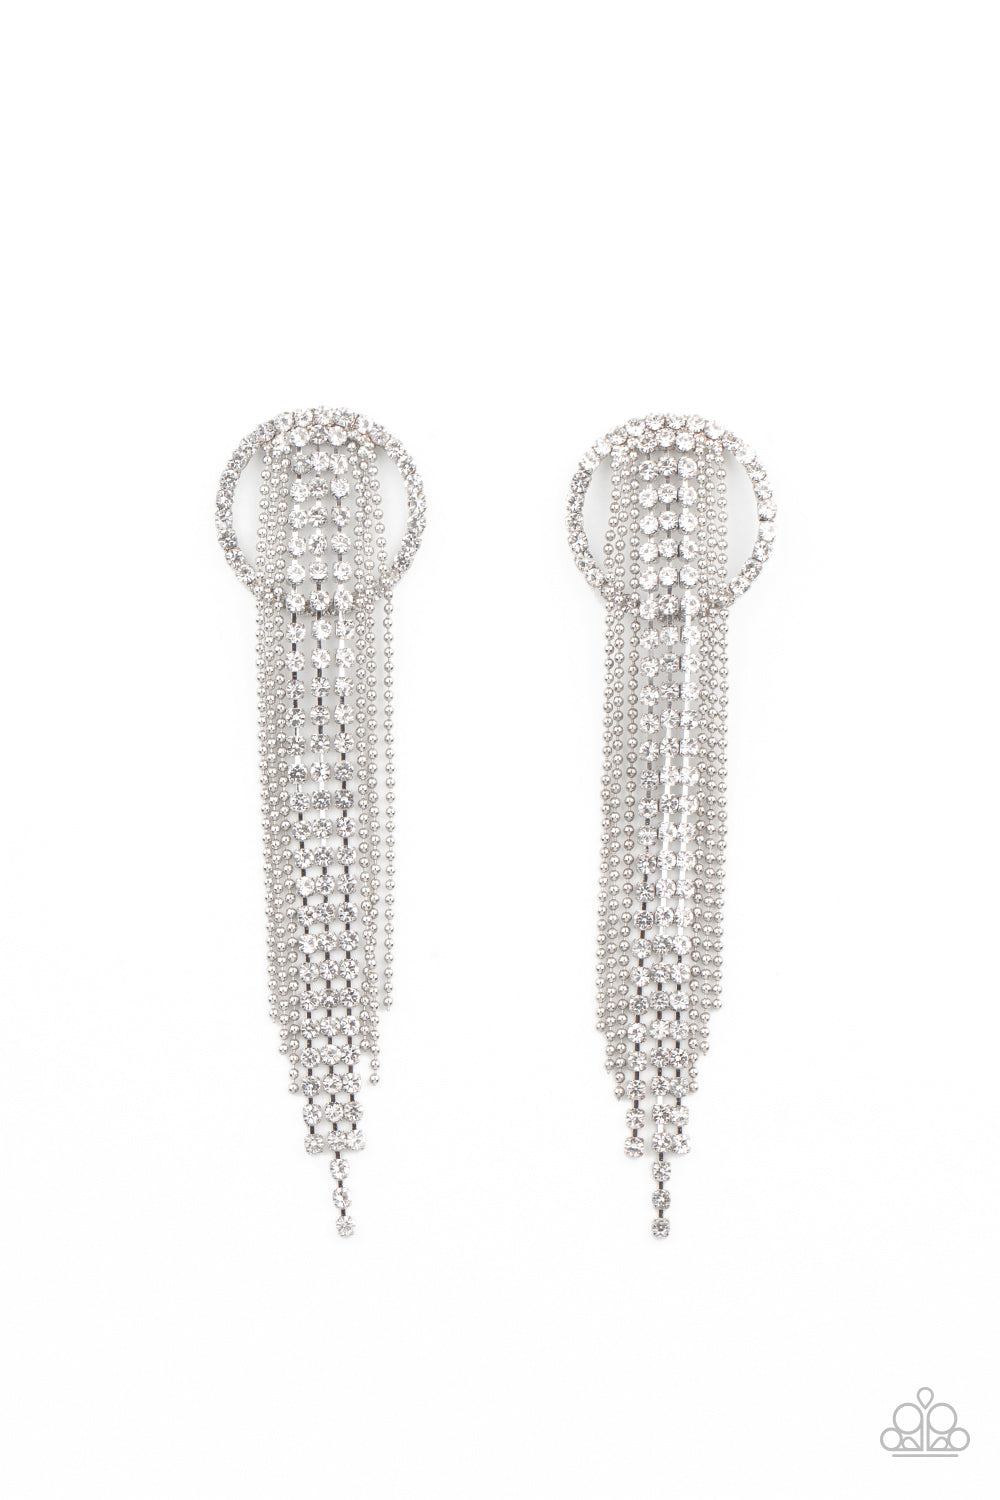 Dazzle by Default White Post Earrings Life of the Party Exclusive - Princess Glam Shop